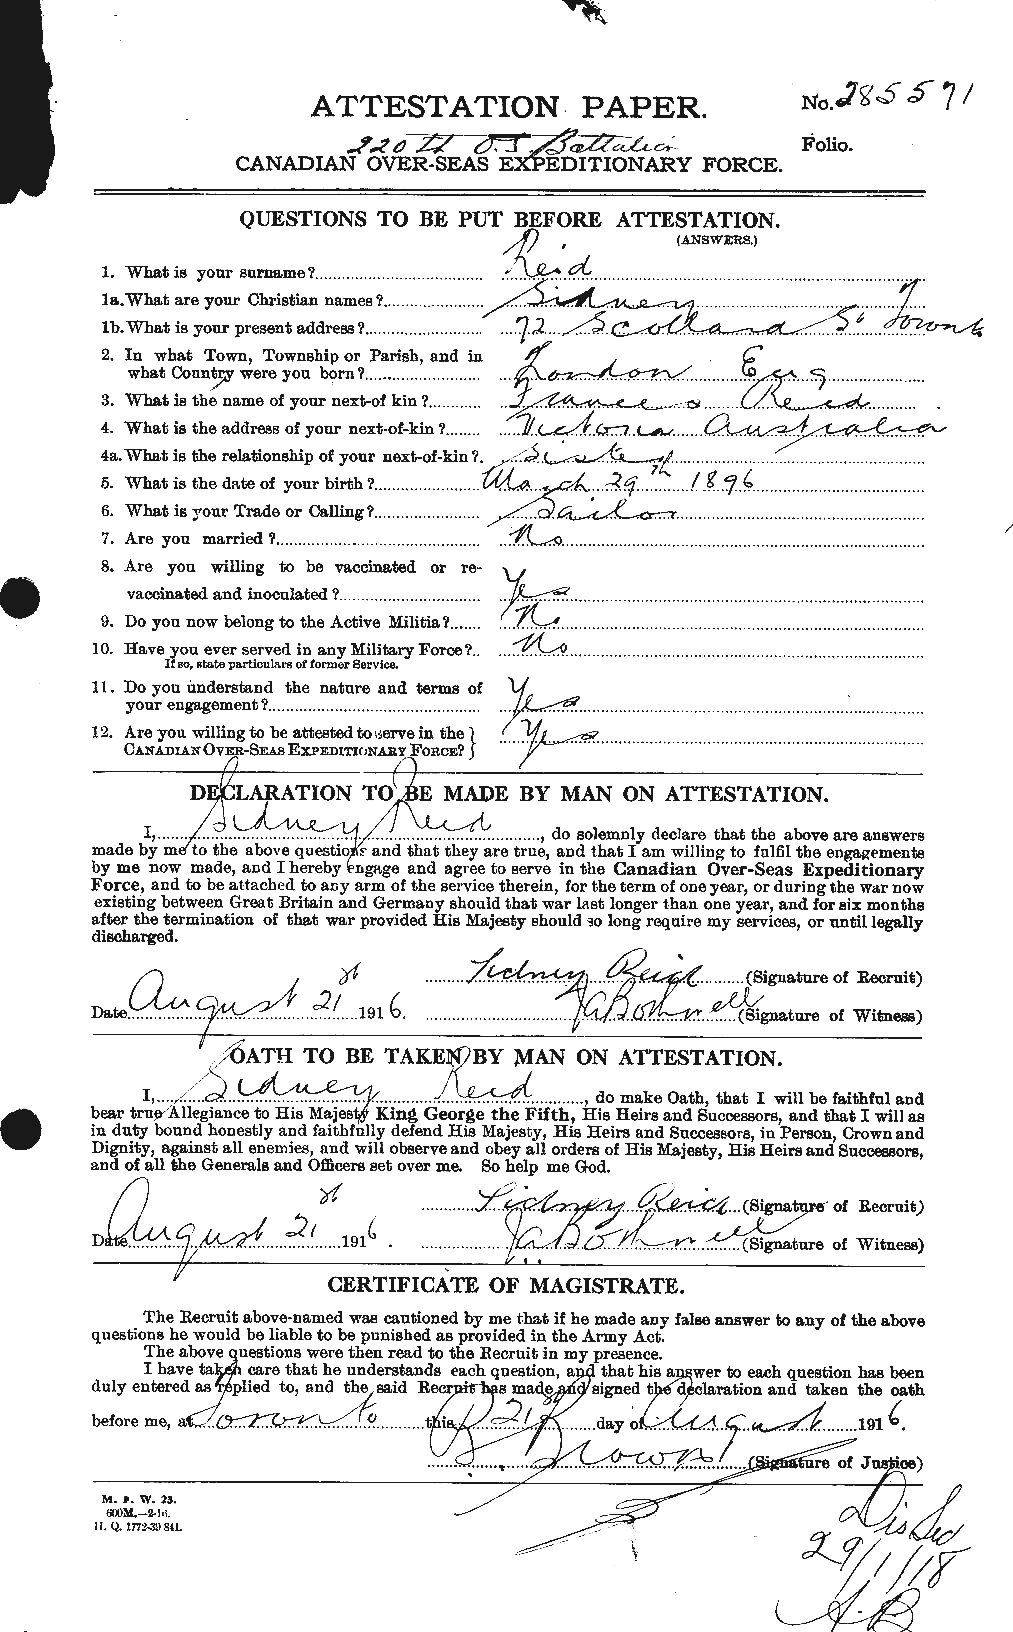 Personnel Records of the First World War - CEF 601958a